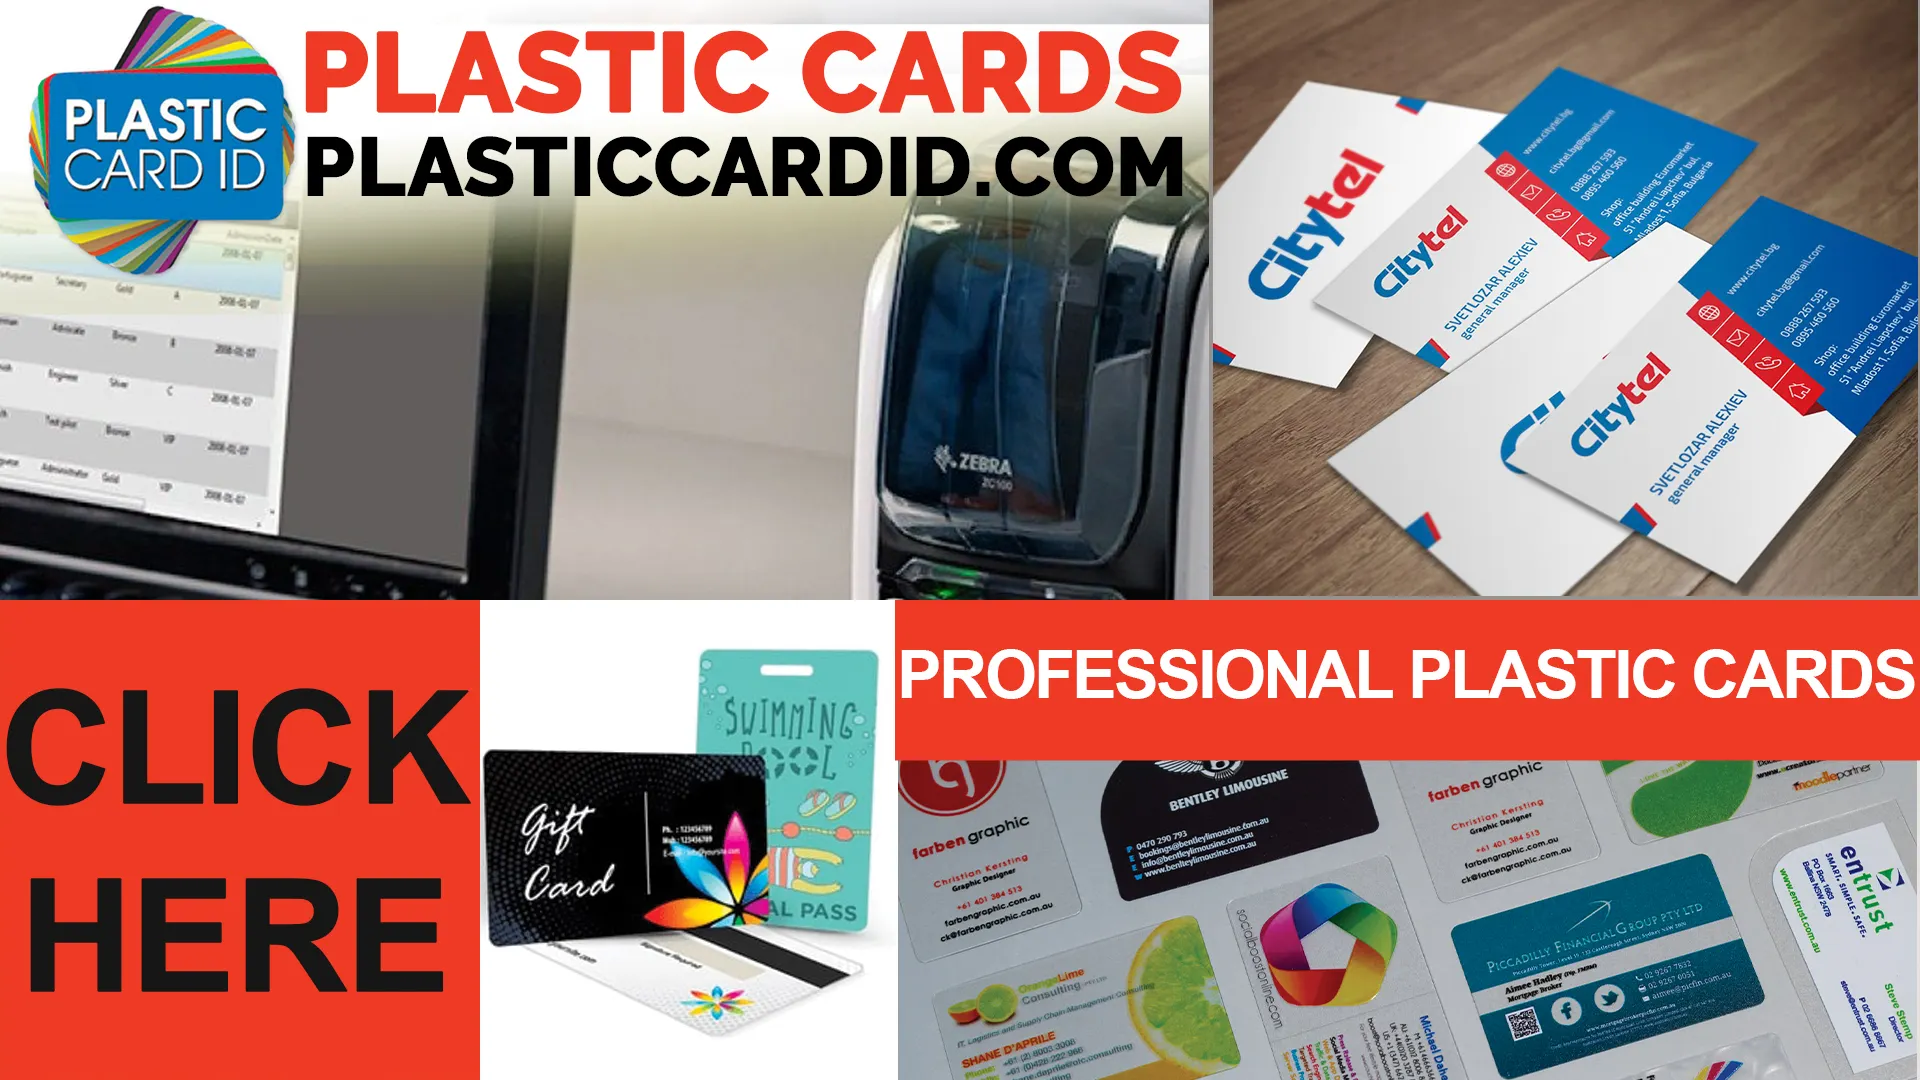  Tailoring Plastic Cards to Global Traditions 